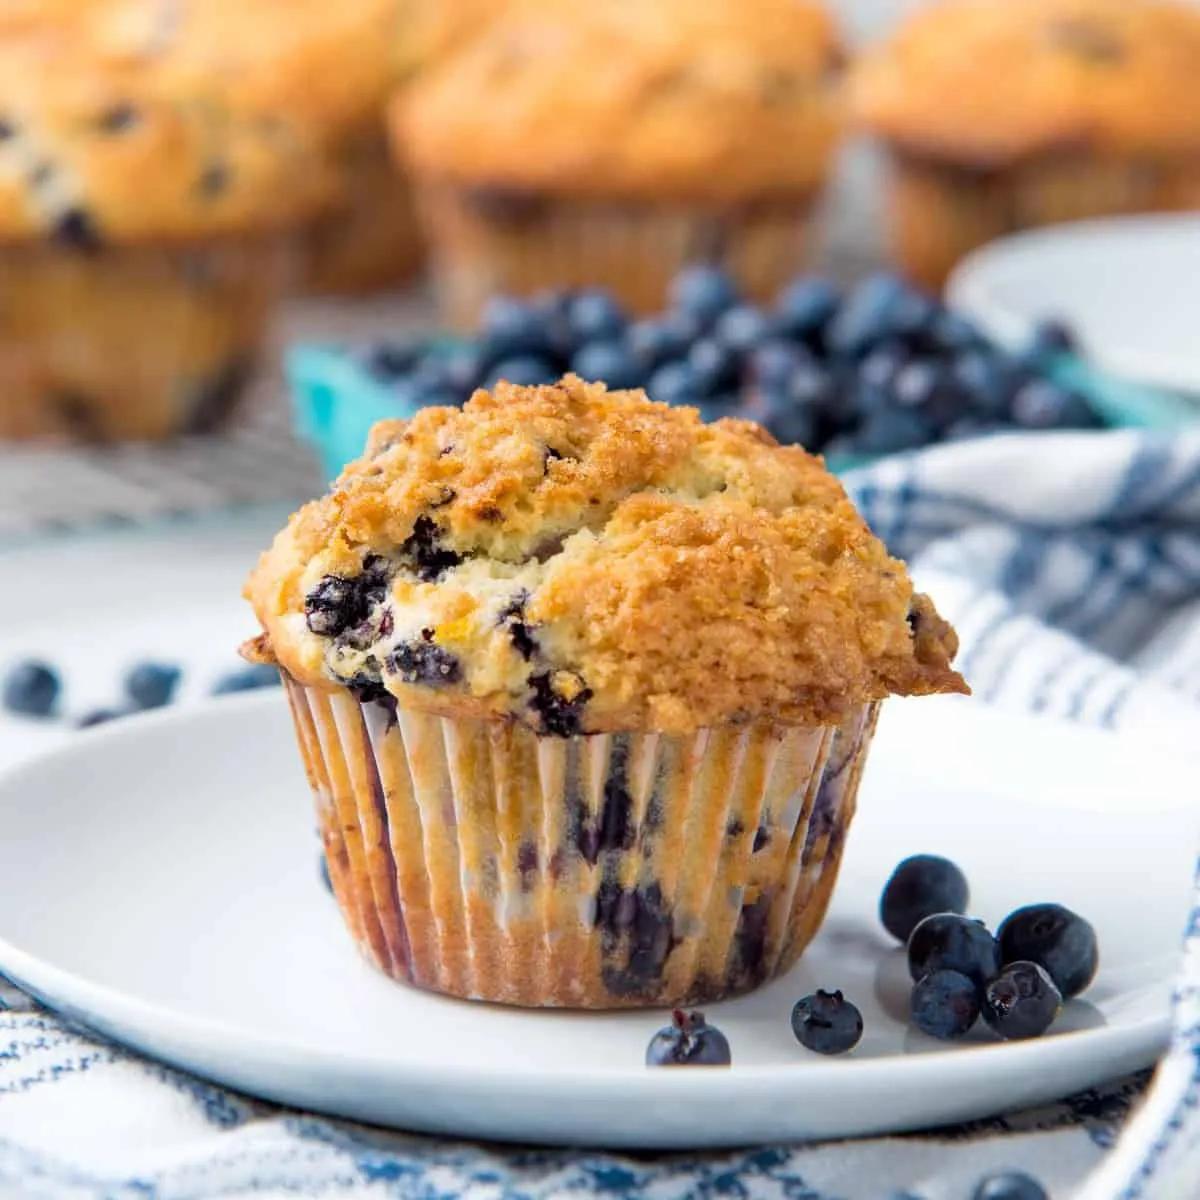 Blueberry Muffins with Streusel Topping - The Flavor Bender